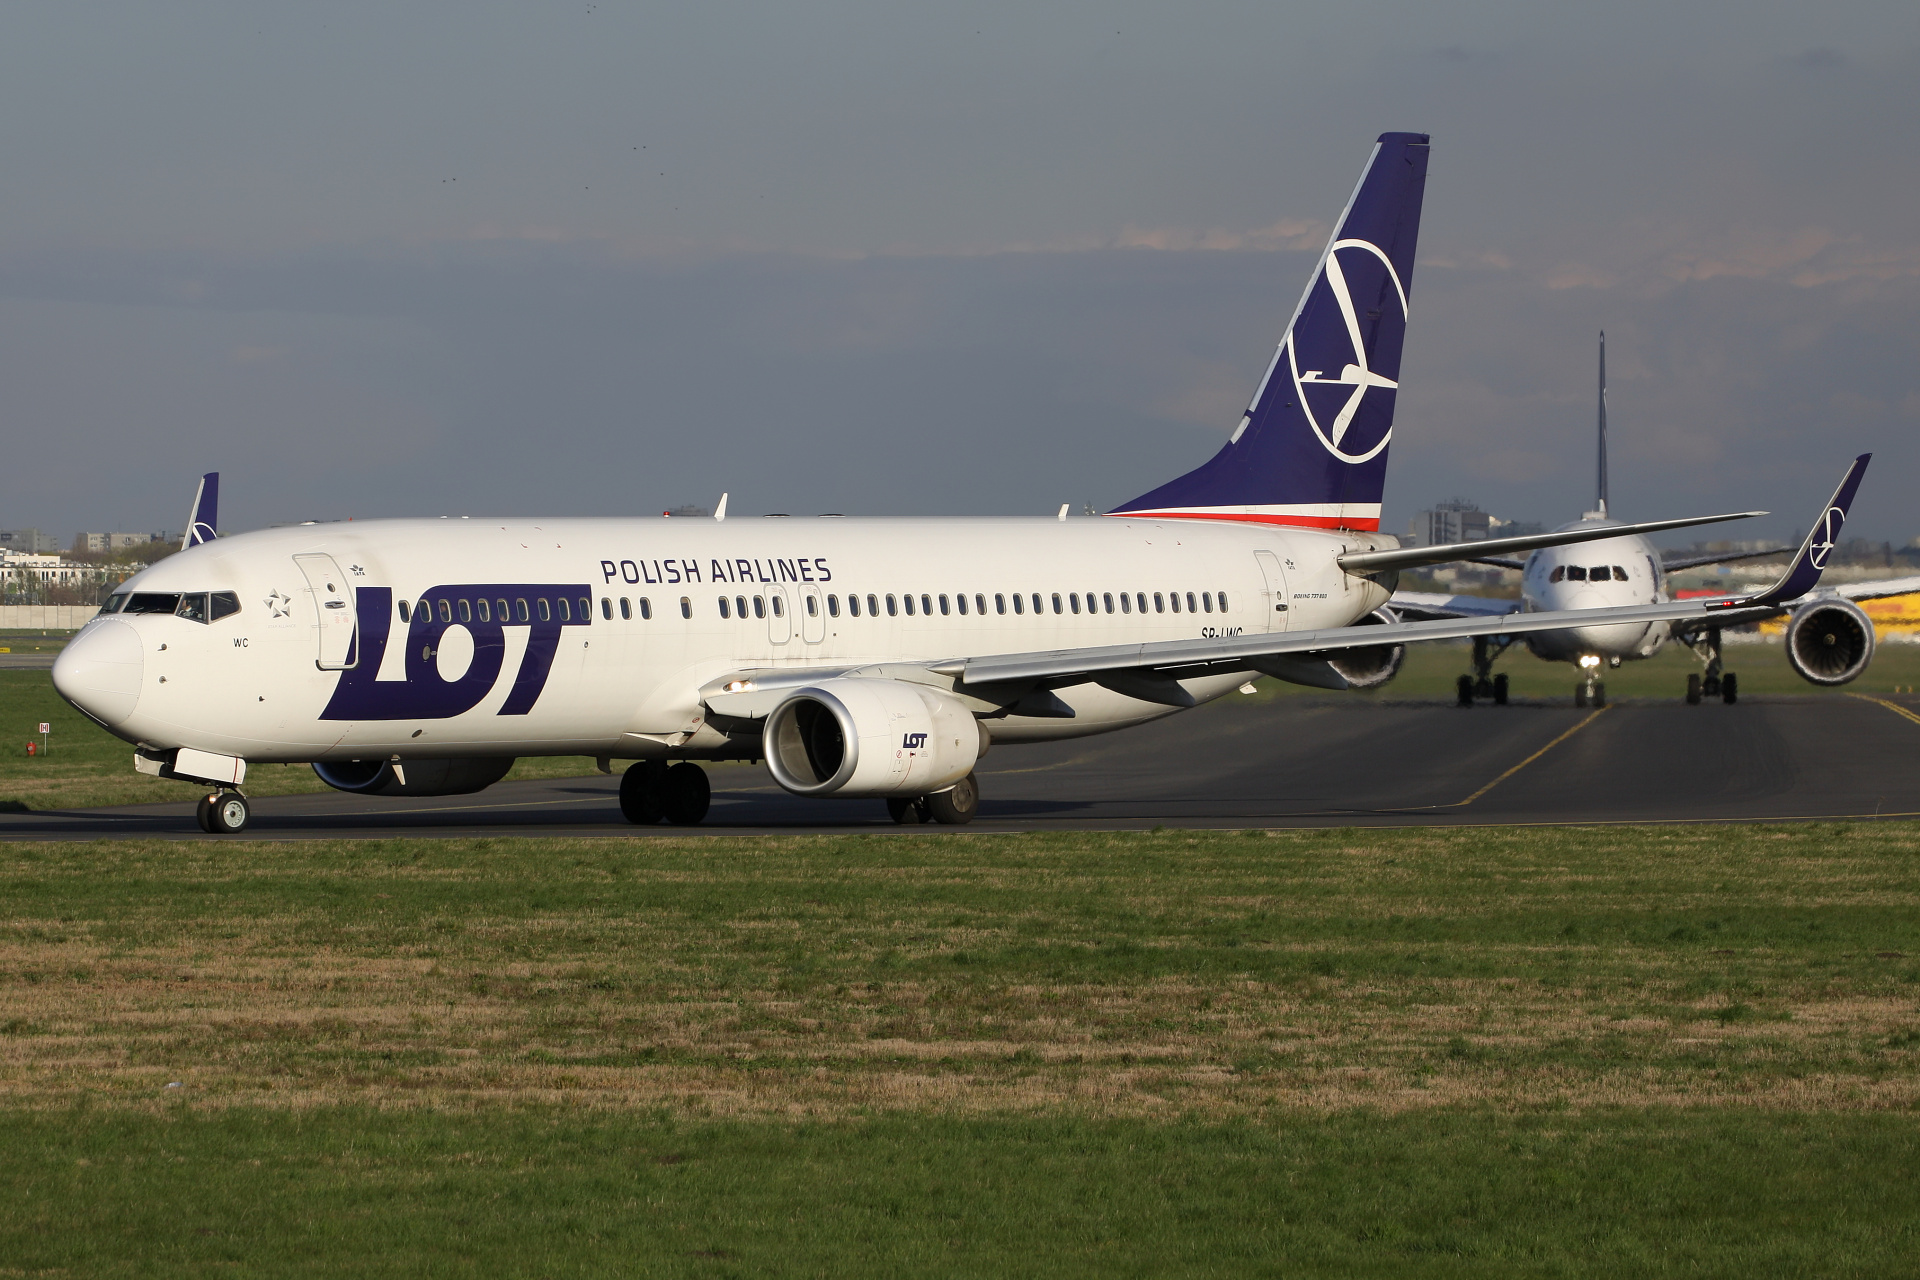 SP-LWC (Aircraft » EPWA Spotting » Boeing 737-800 » LOT Polish Airlines)